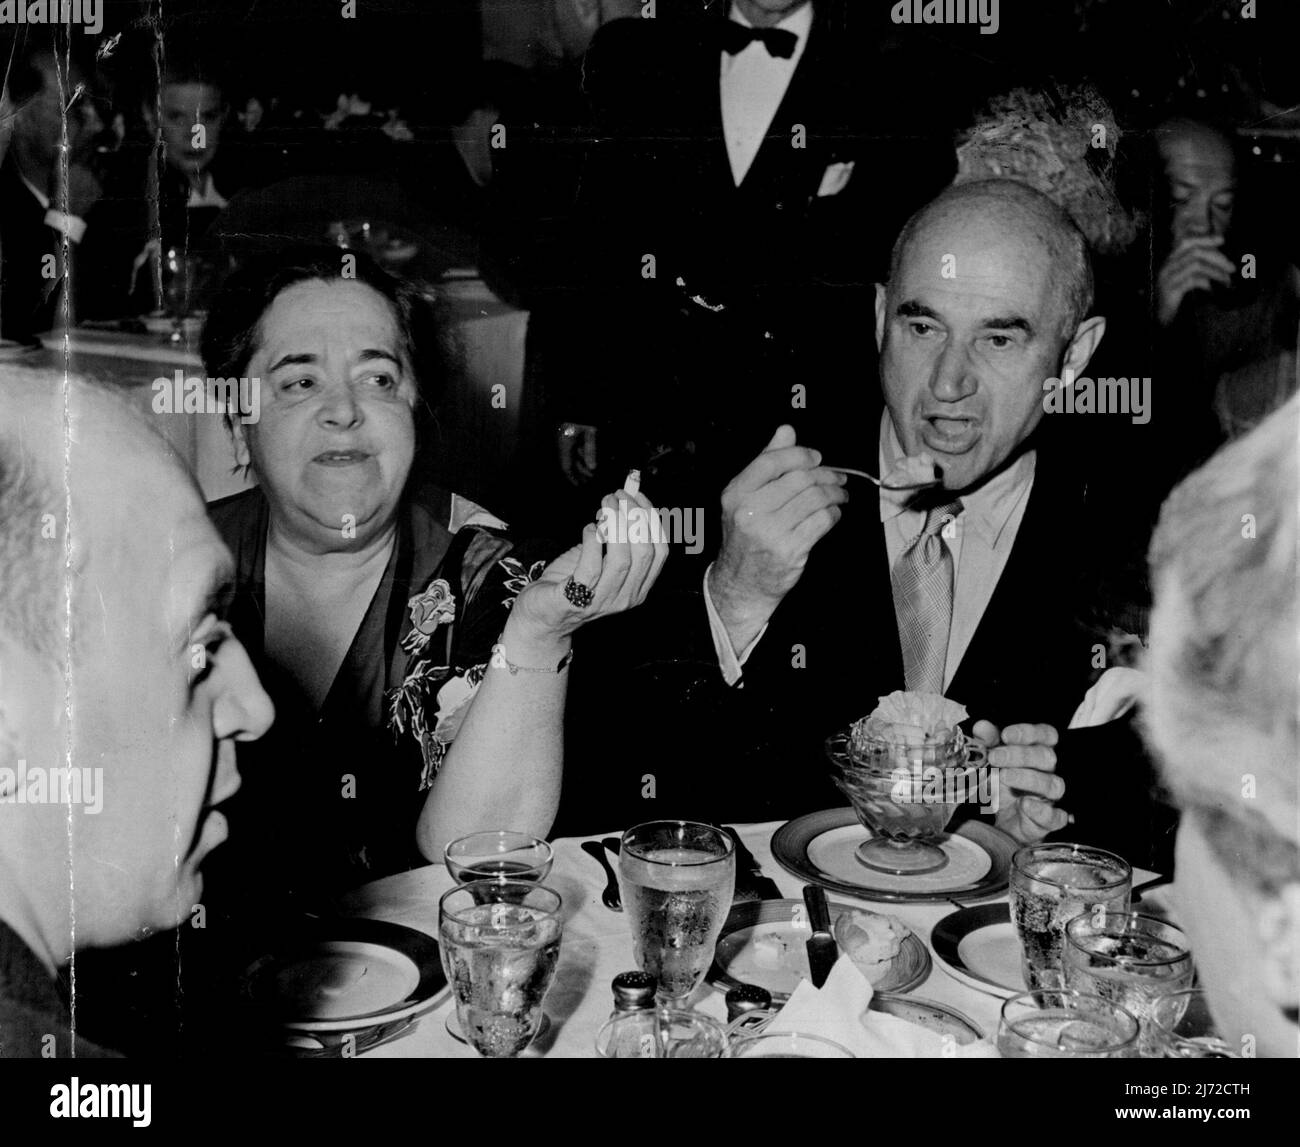 Famous Party-Giver ... American Elsa Maxwell, who has just completed writing her autobiography, lunched at Australian Lady Kenmare's heavenly home which looks across to Monte Carlo, that multi-colored jewel. Elsa Maxwell as guest of film magnate Sam Goldwyn at a Hollywood party. August 25, 1952. Stock Photo